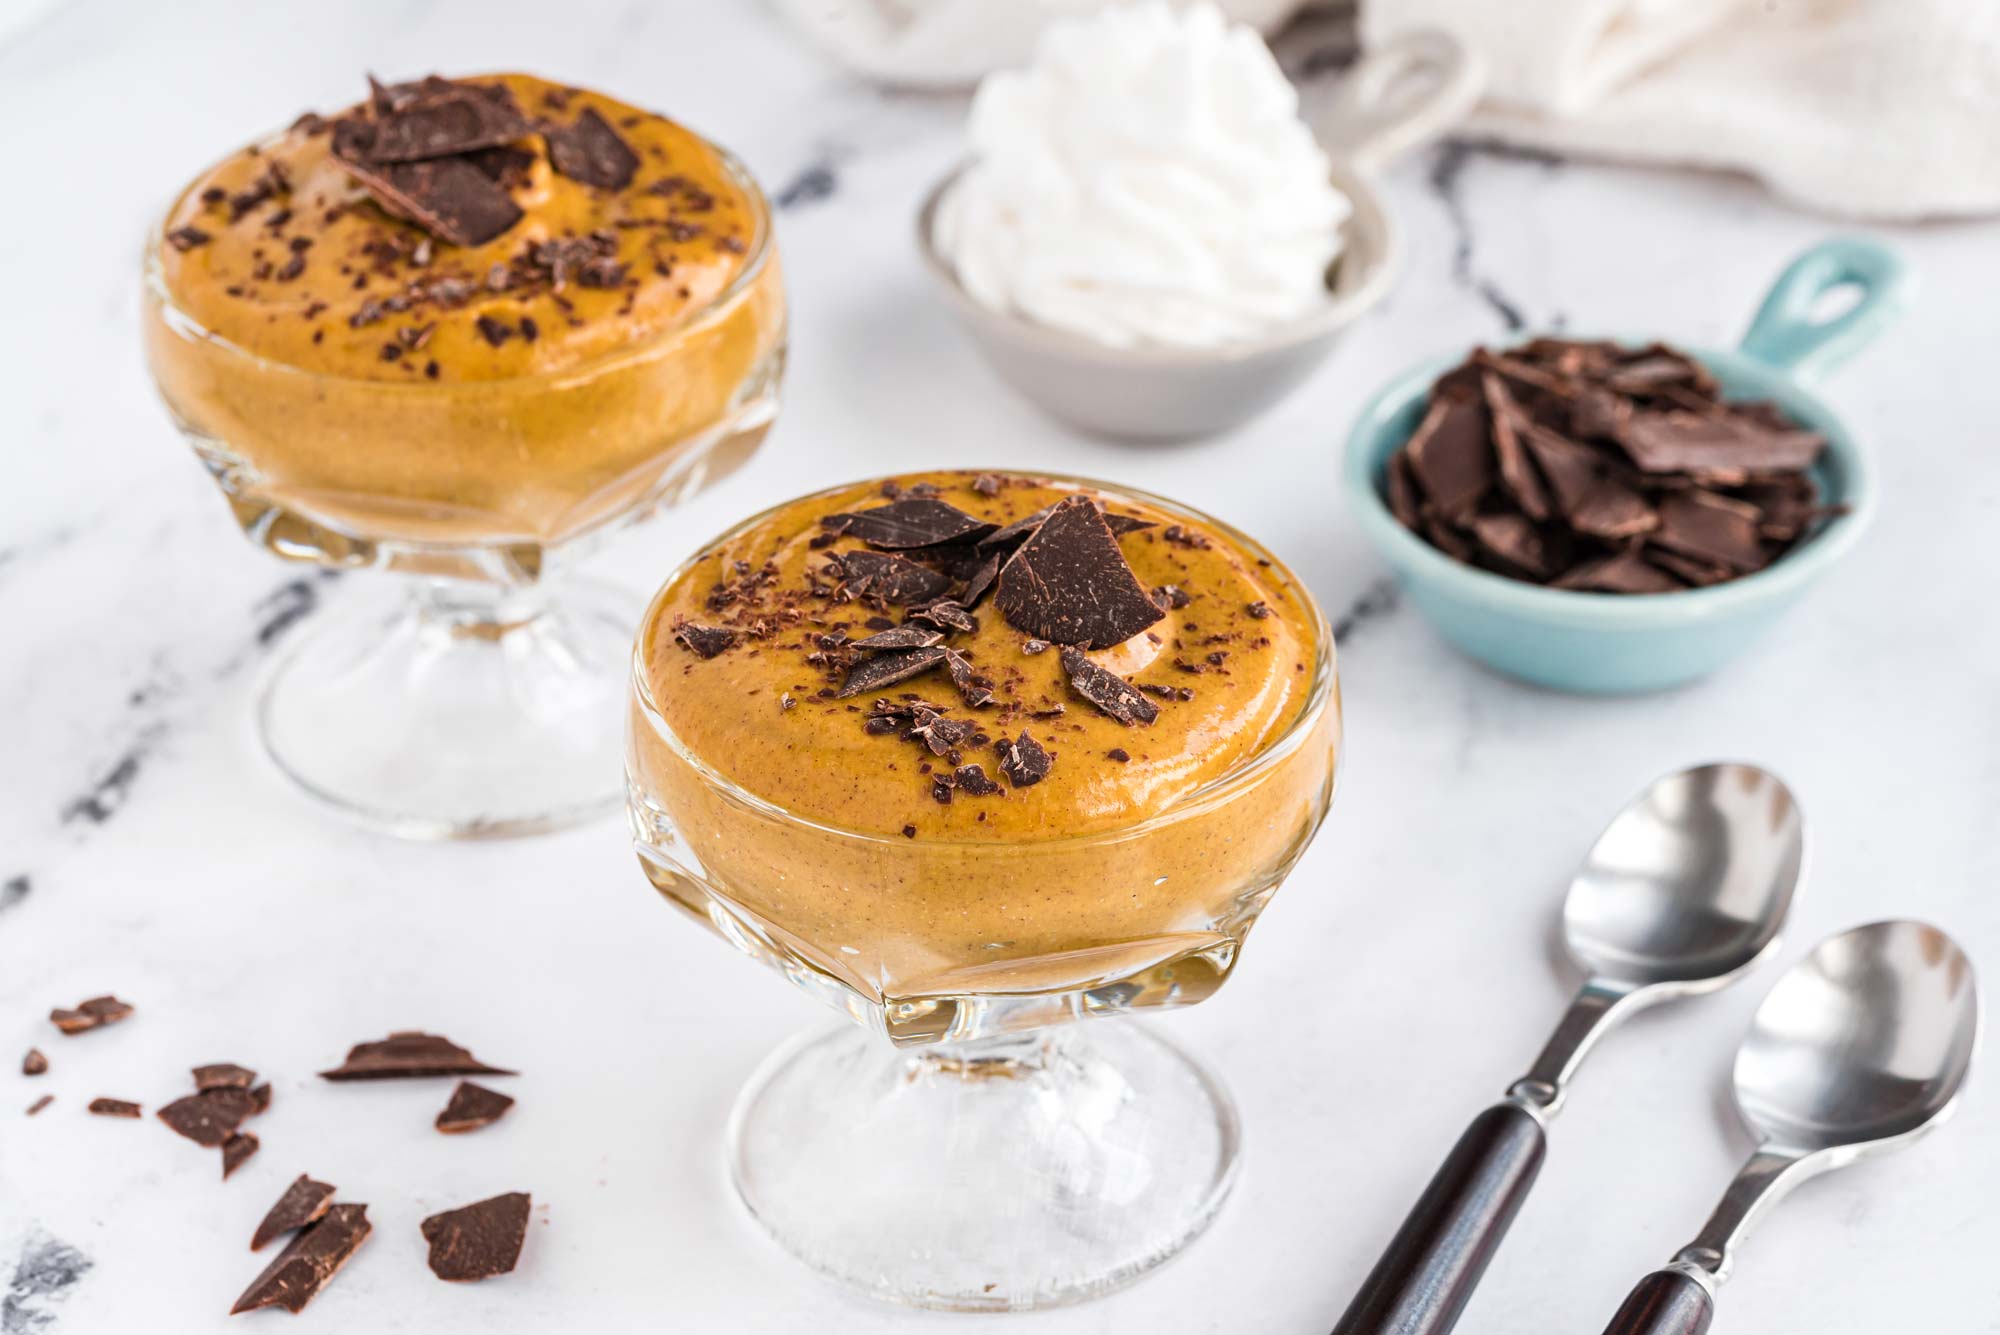 Food combining recipe - Pumpkin chia pudding in serving glasses